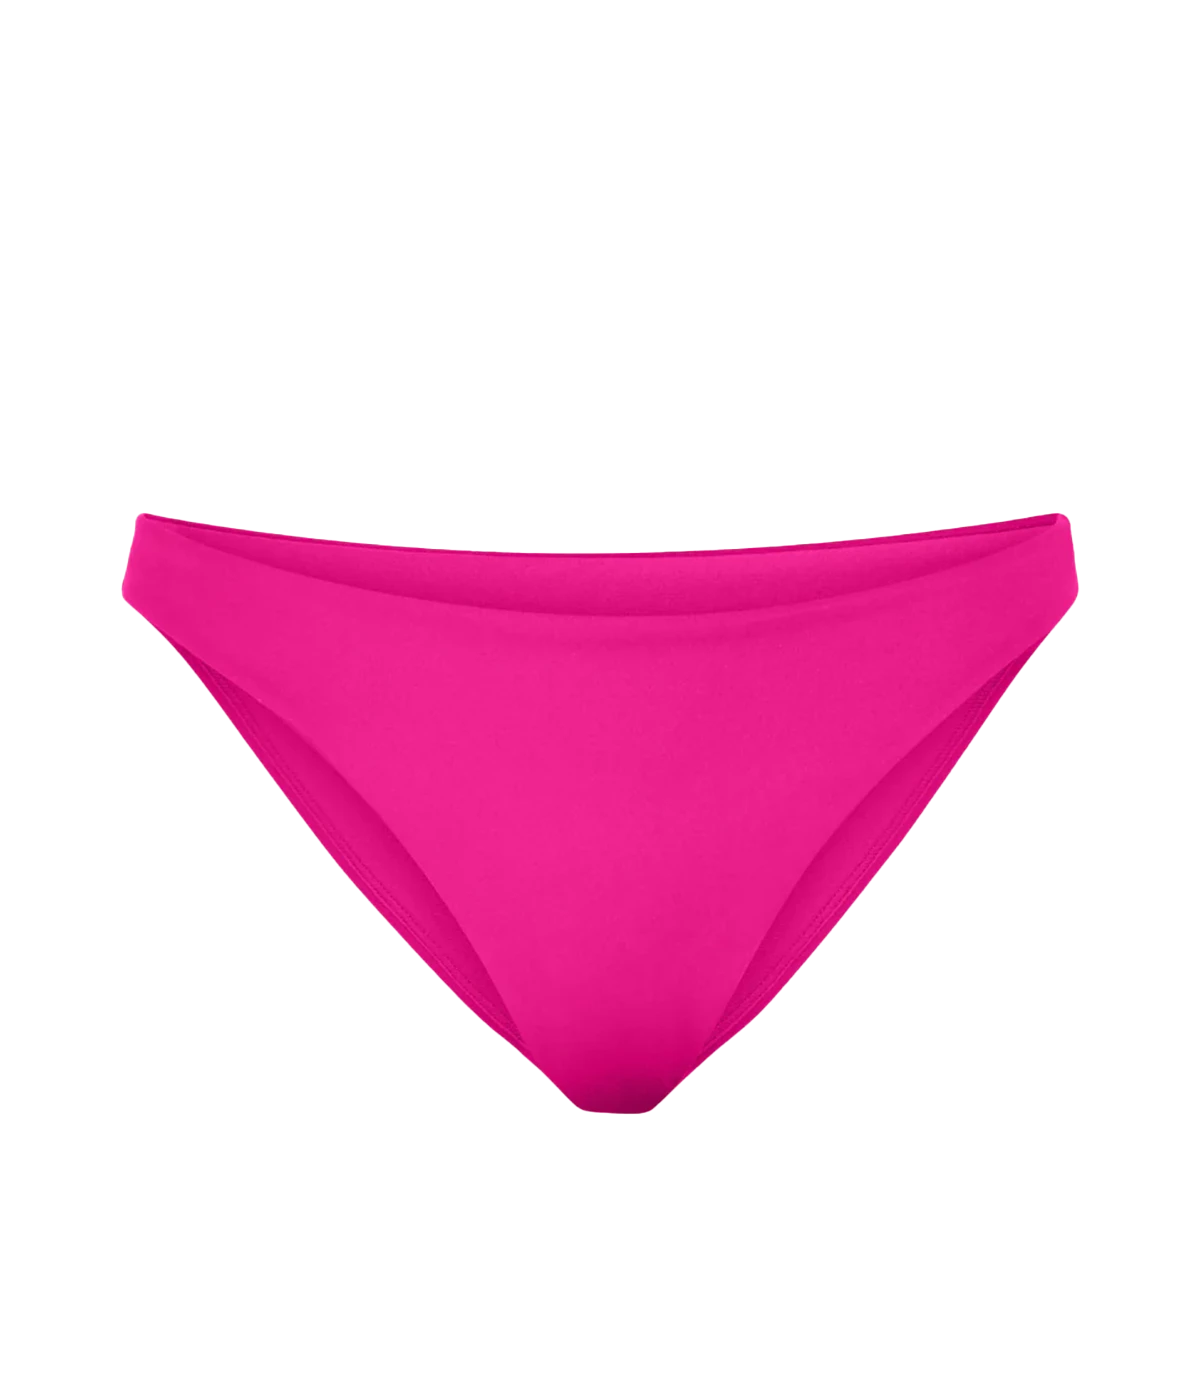 The perfect companion from the beach to the pool, take this hot pink bikini bottom wherever you go. Double lined for comfort, wear this bikini everywhere, all day, perfect for tanning.    Made of compressive fabric, wear the Wear To Bottom. Featuring a low-rise bottom, medium bum coverage and a low-cut leg this bikini is double lined for comfort.